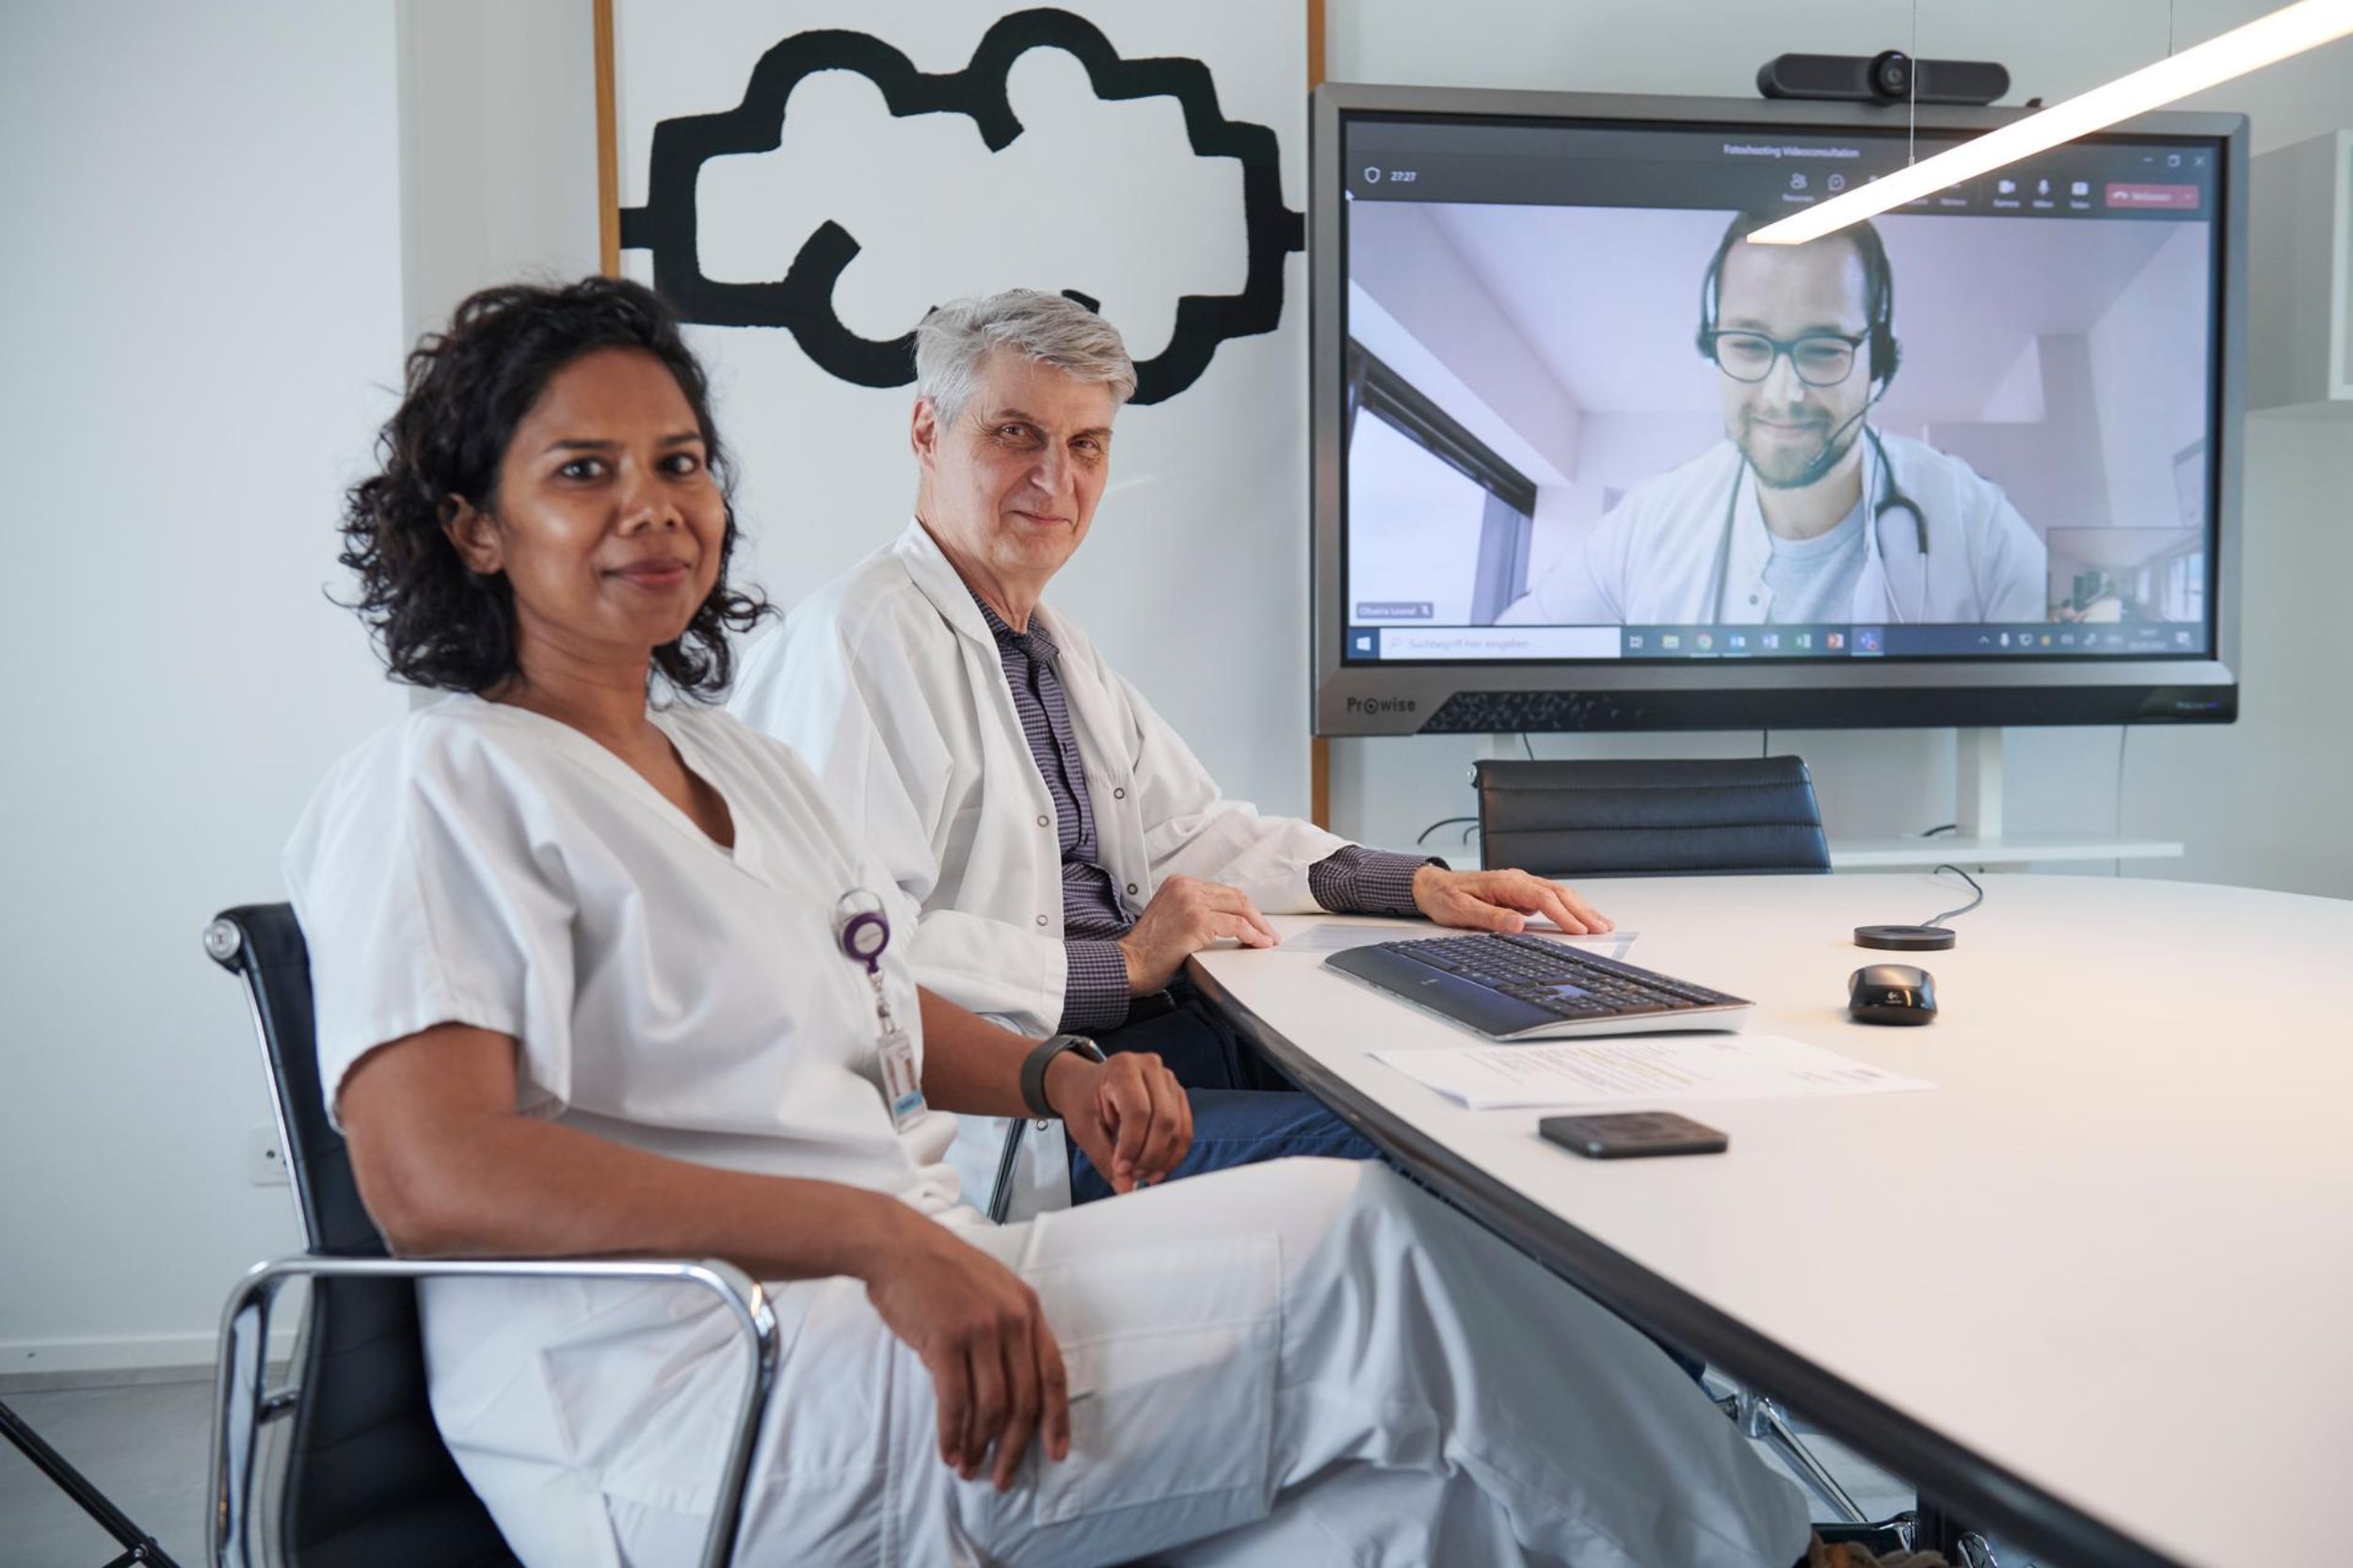 Doctors at Basel University Hospital consult a patient telemedically via video conference